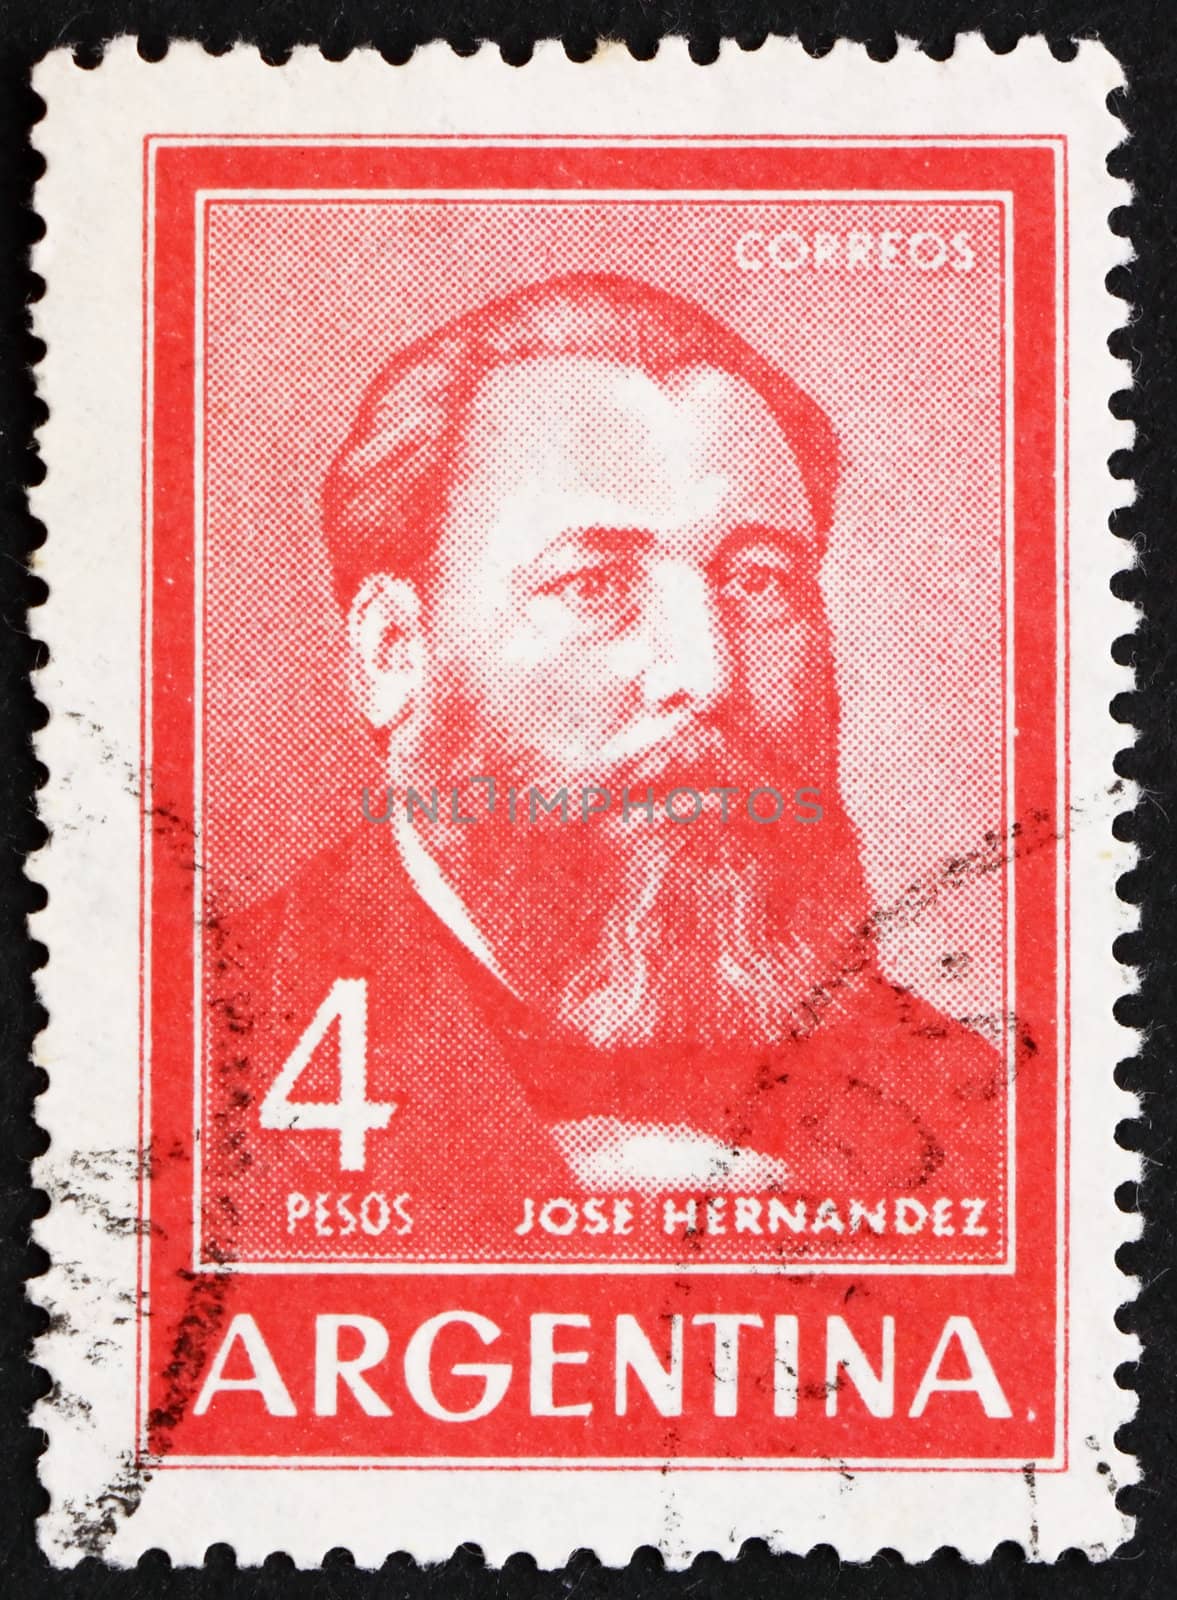 ARGENTINA - CIRCA 1965: a stamp printed in the Argentina shows Jose Hernandez, Writer, Journalist, Poet and Politician, circa 1965